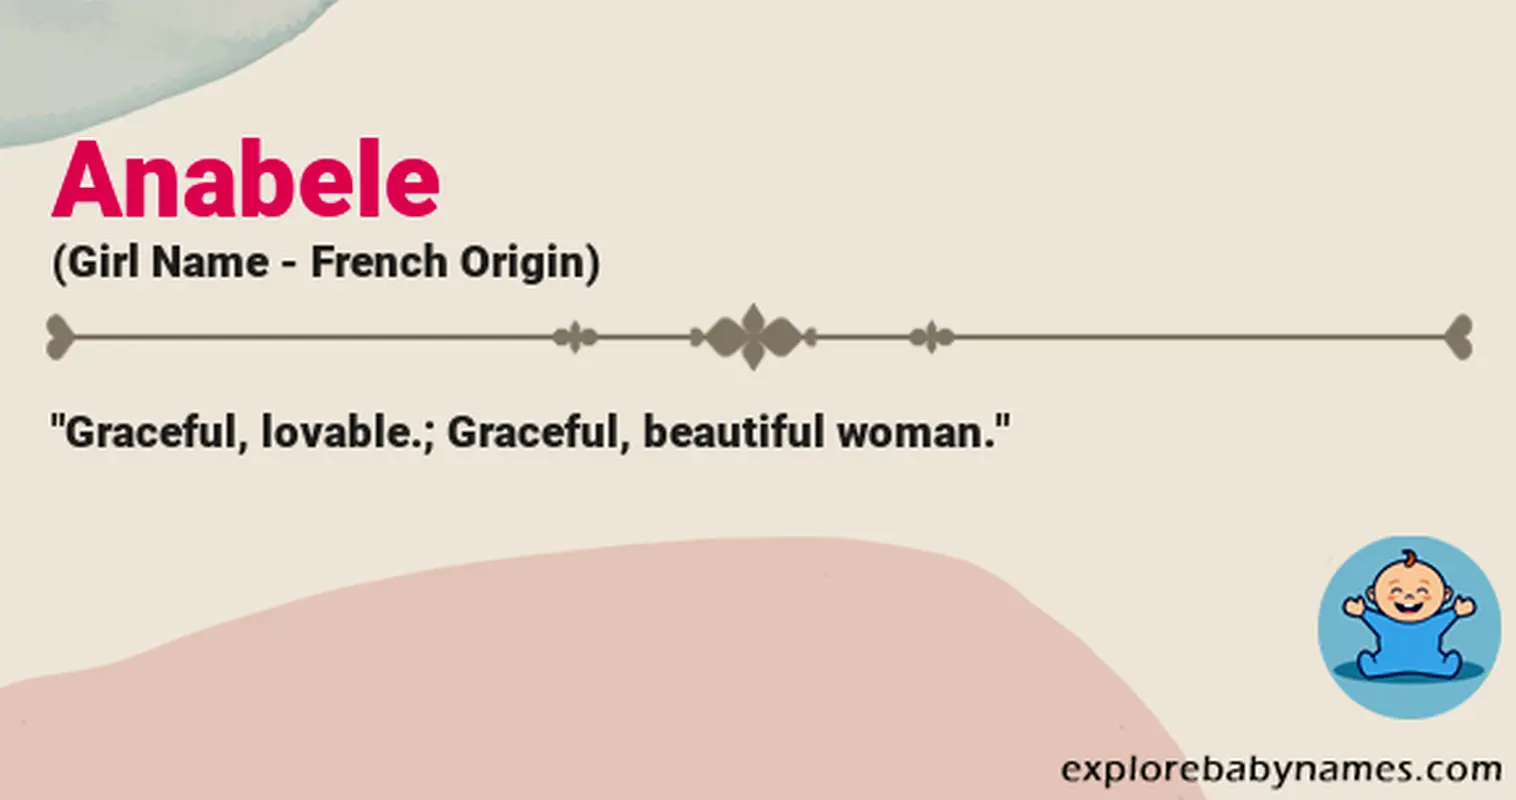 Meaning of Anabele